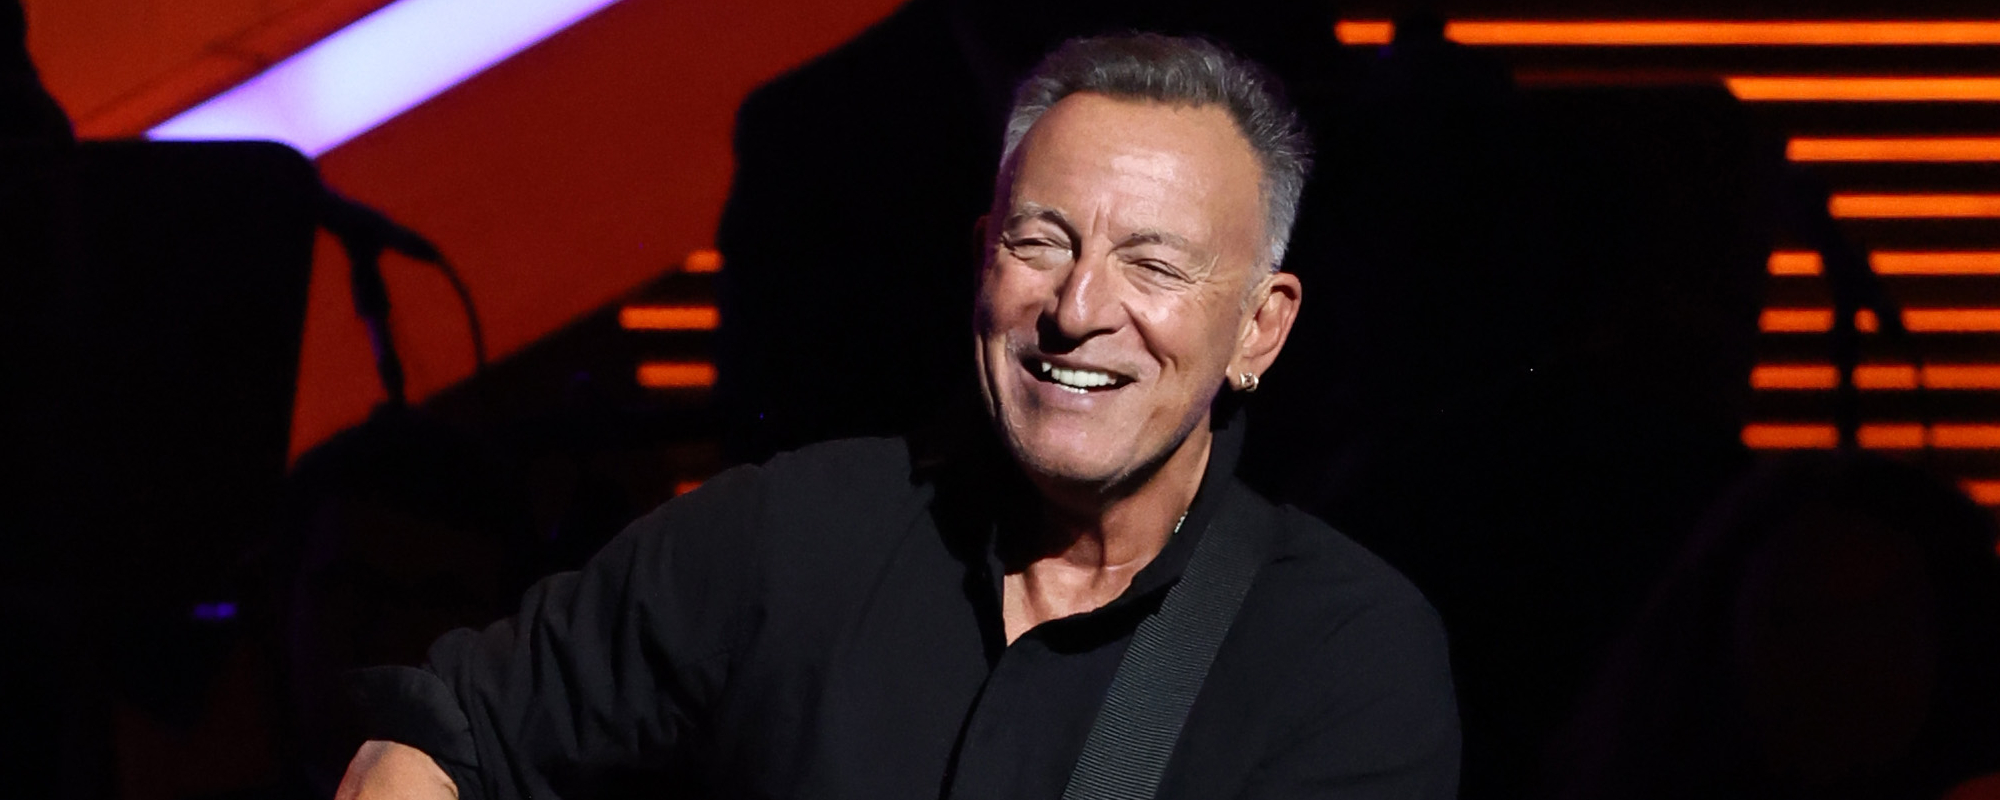 Bruce Springsteen Honors Mother Following Her Death, Shares Video Dancing to Glenn Miller’s “In the Mood”